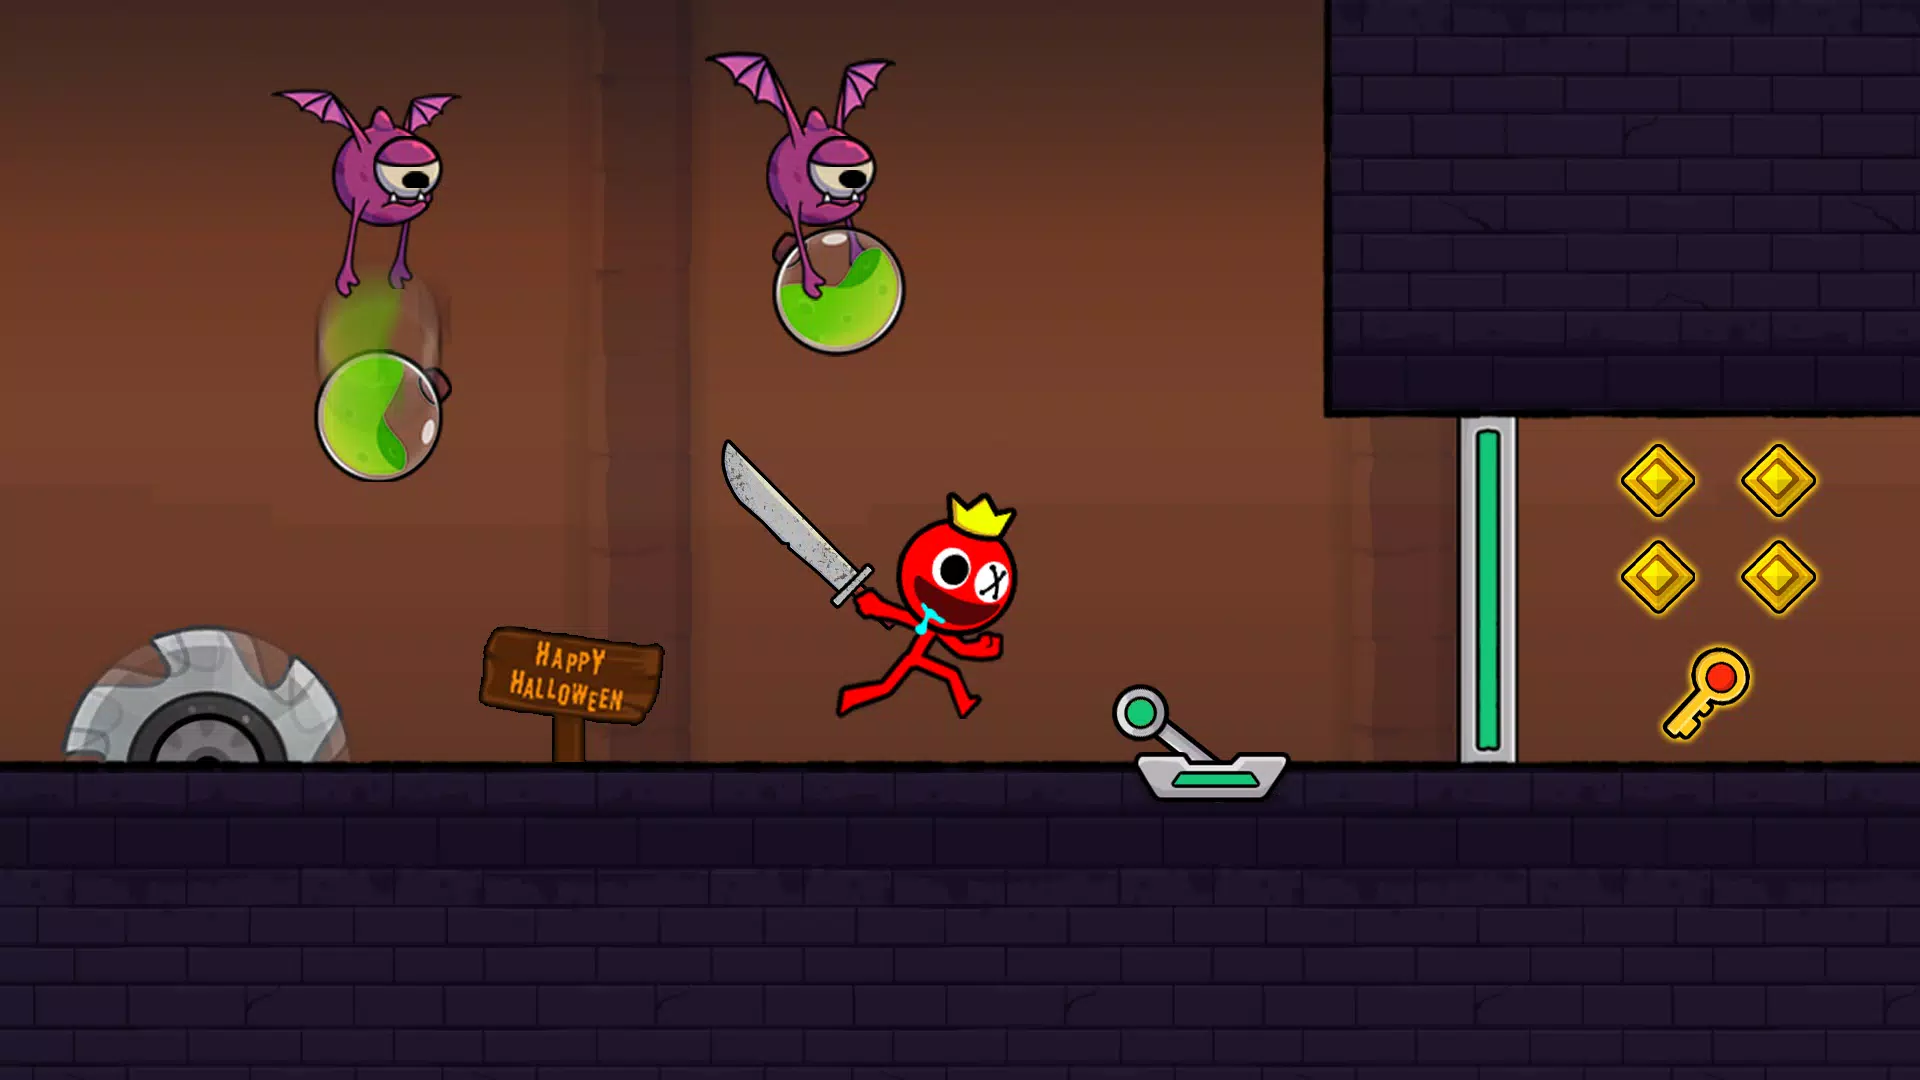 Red Stickman: Stick Adventure Game for Android - Download